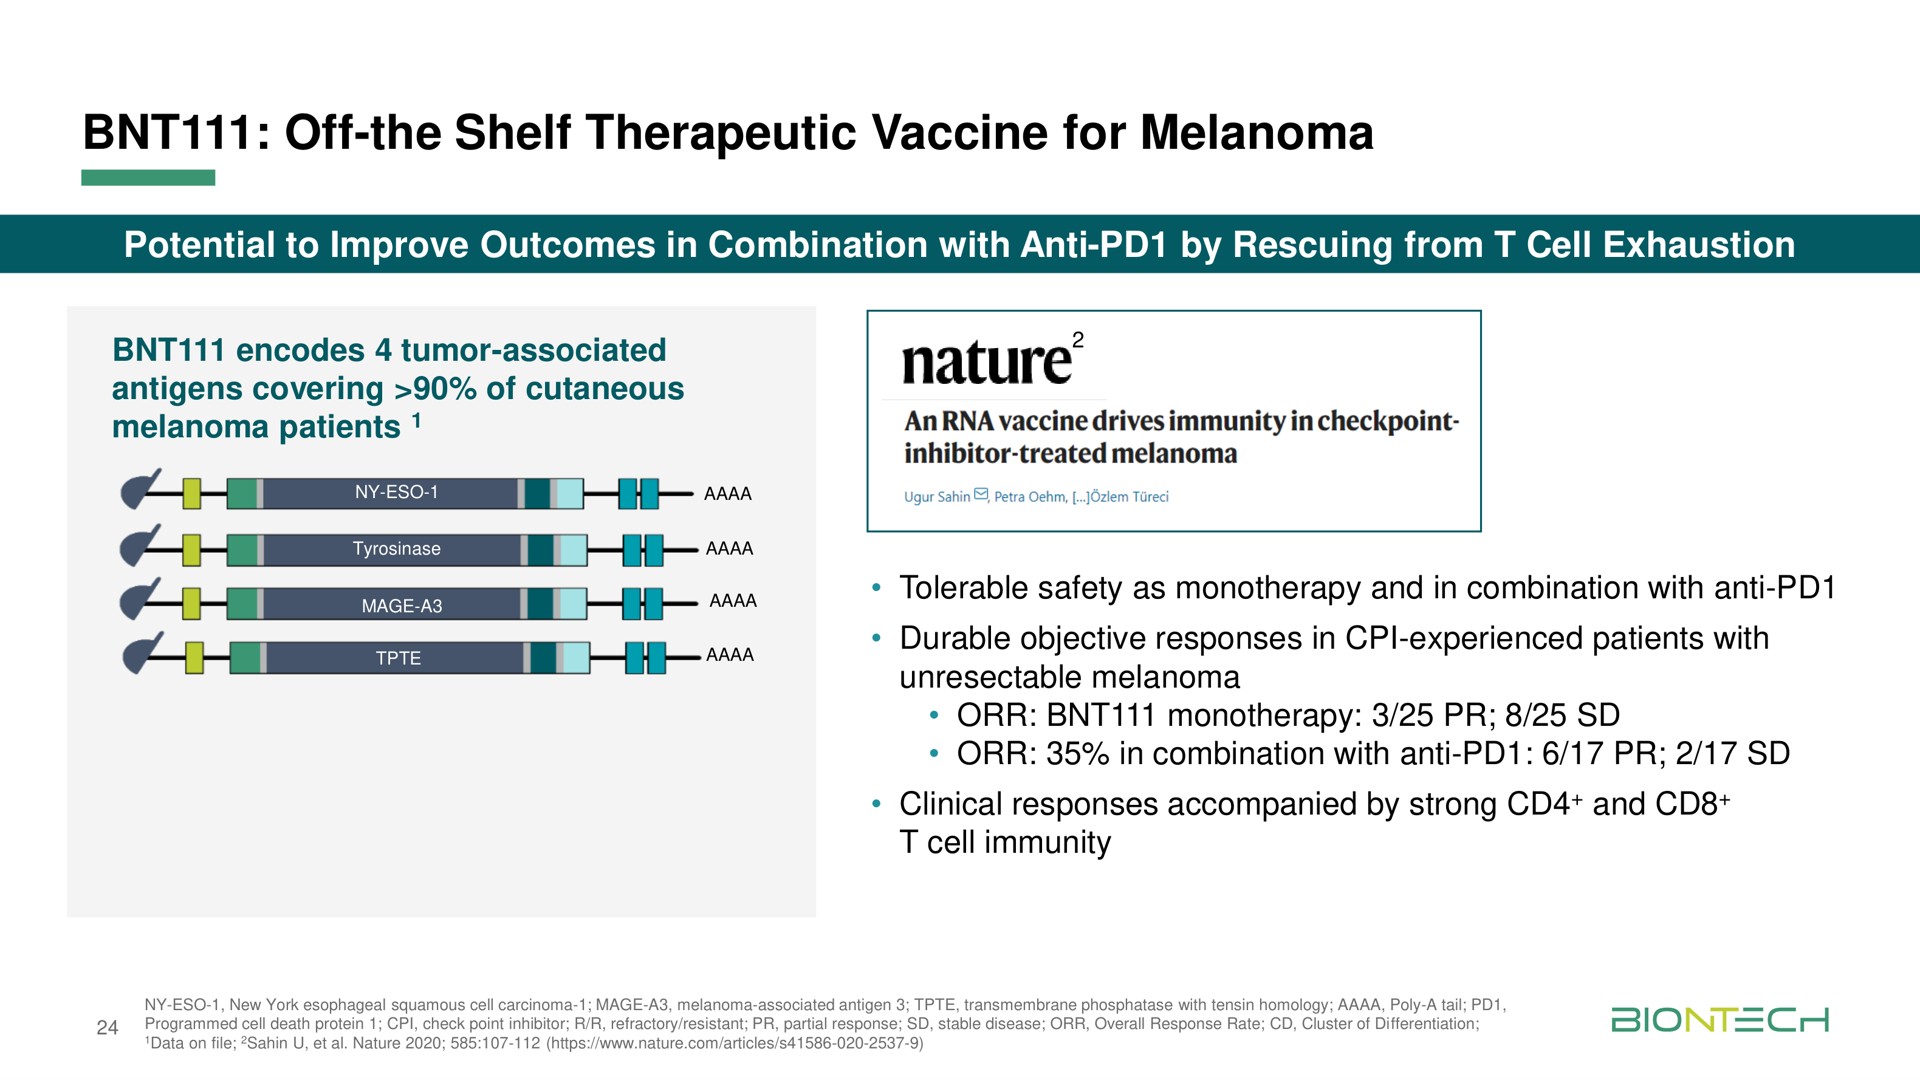 off the shelf therapeutic vaccine for melanoma | BioNTech